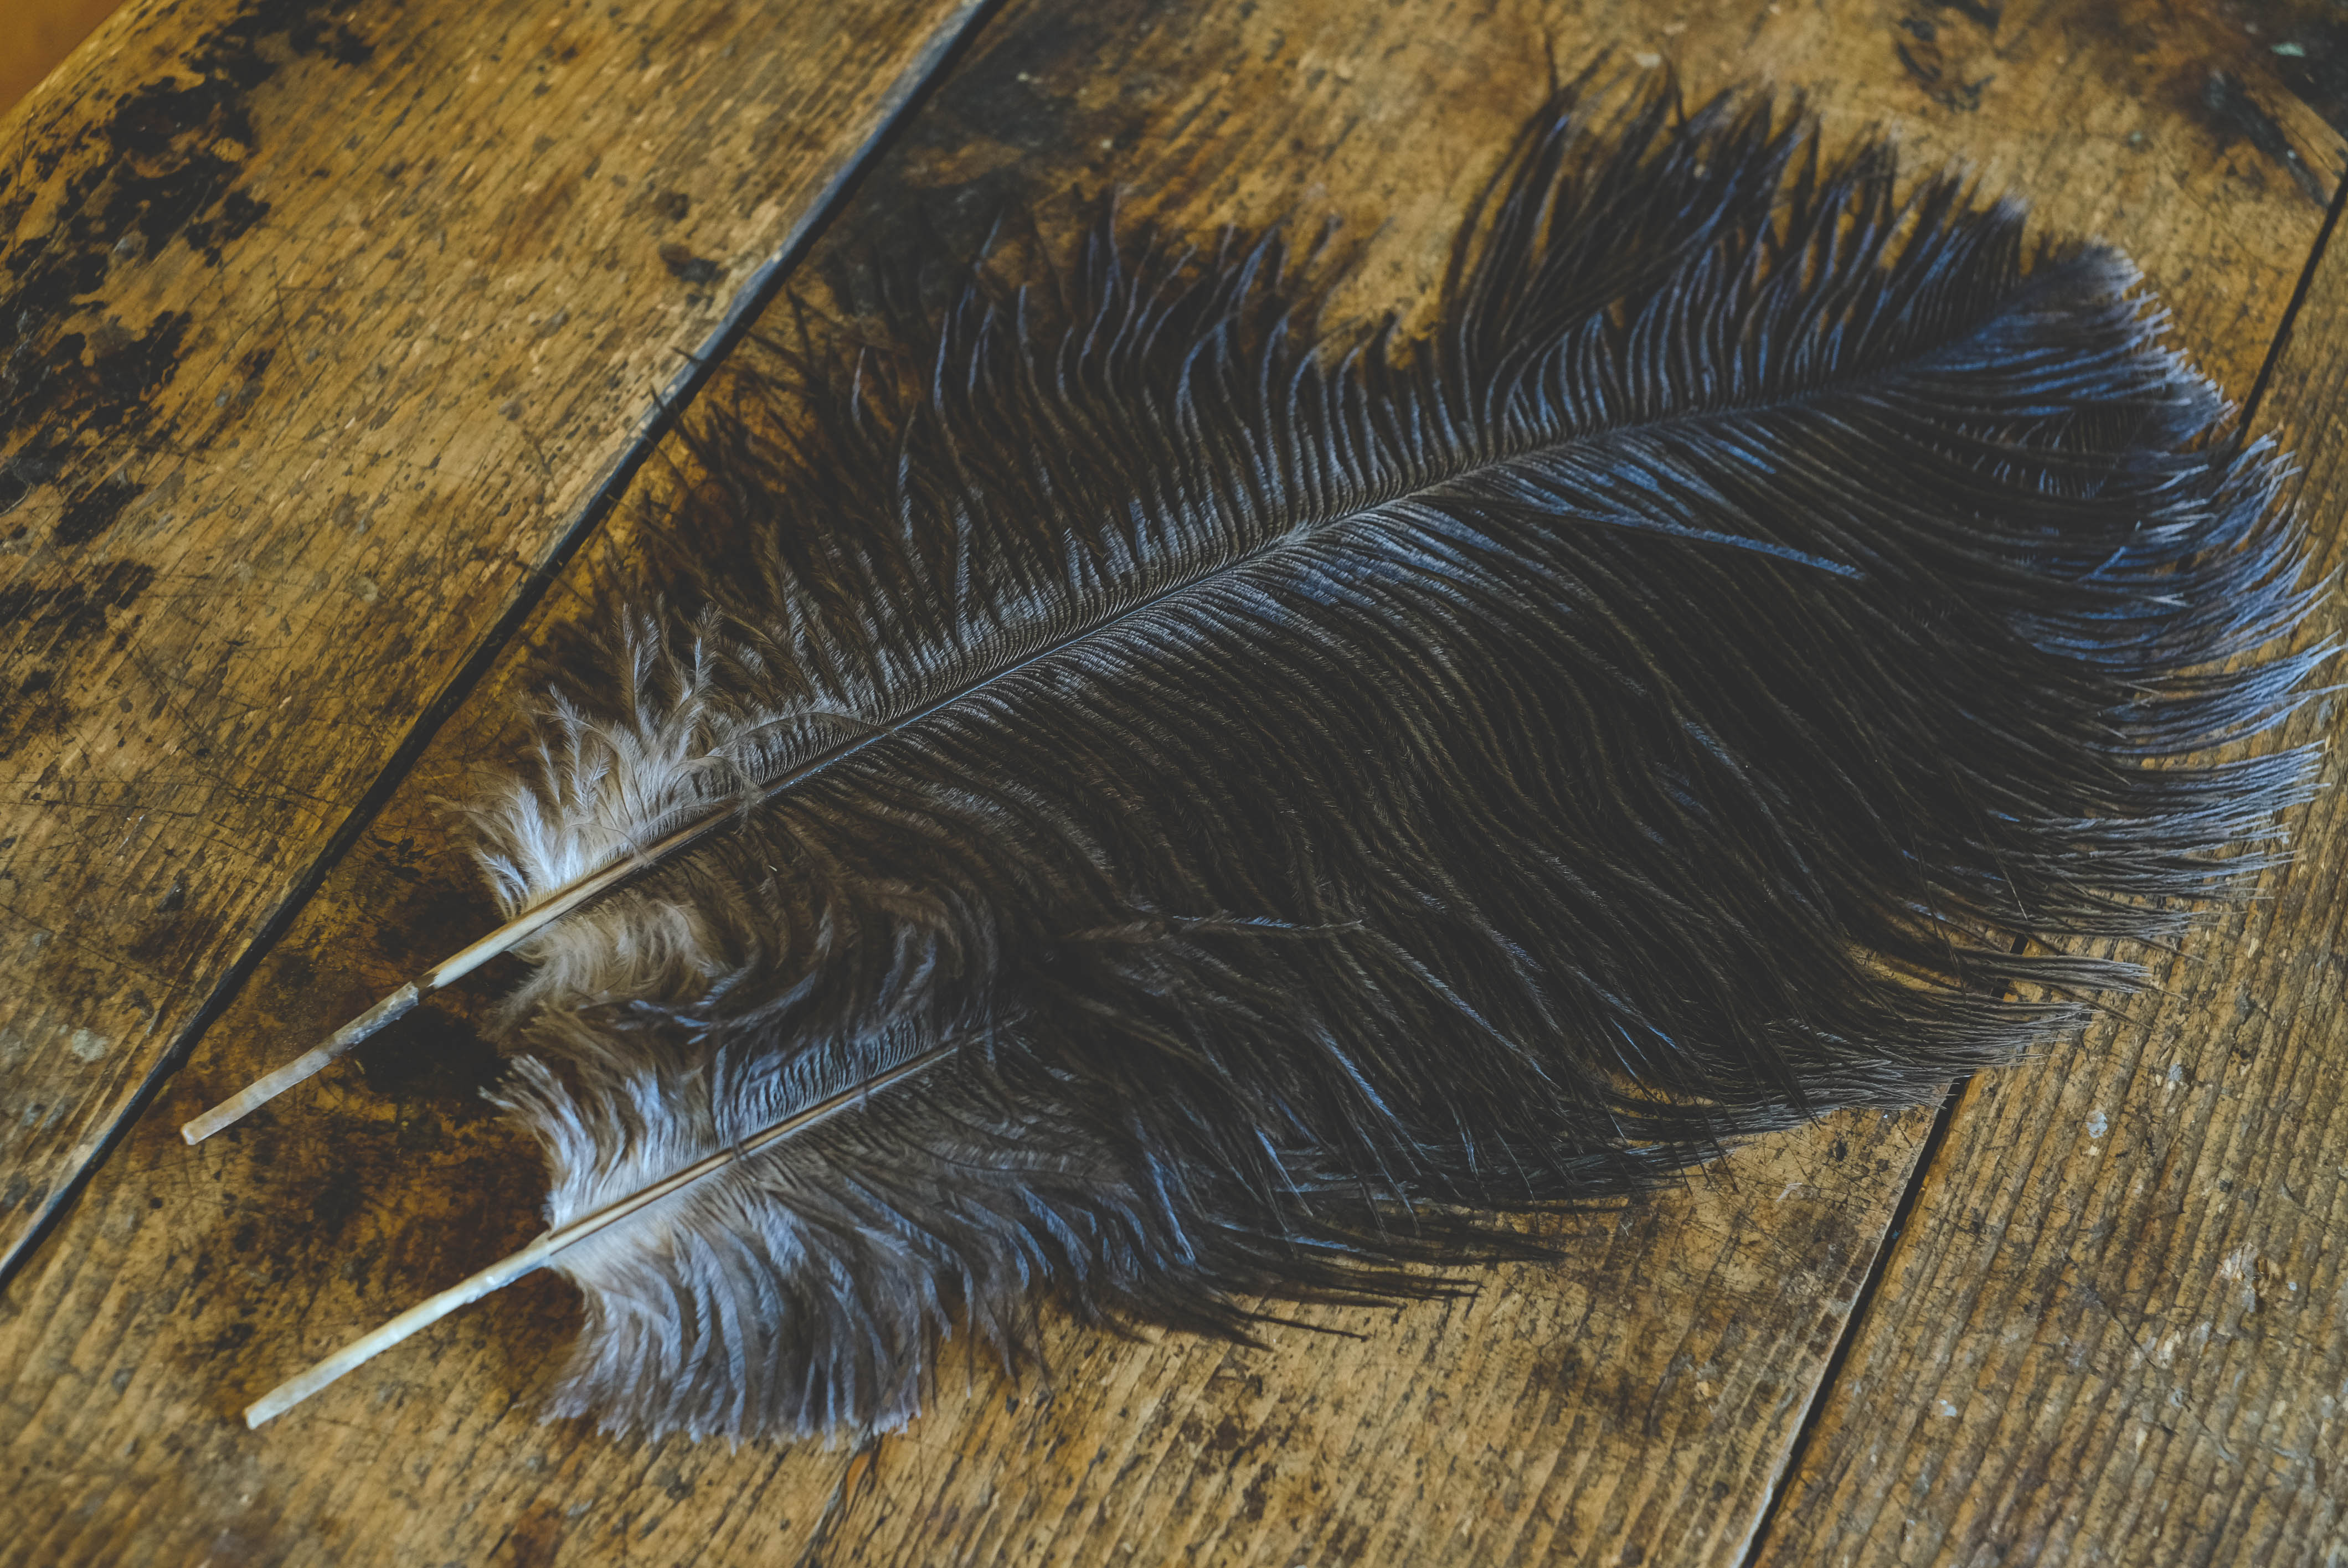 Natural gray ostrich feather 40-45cm